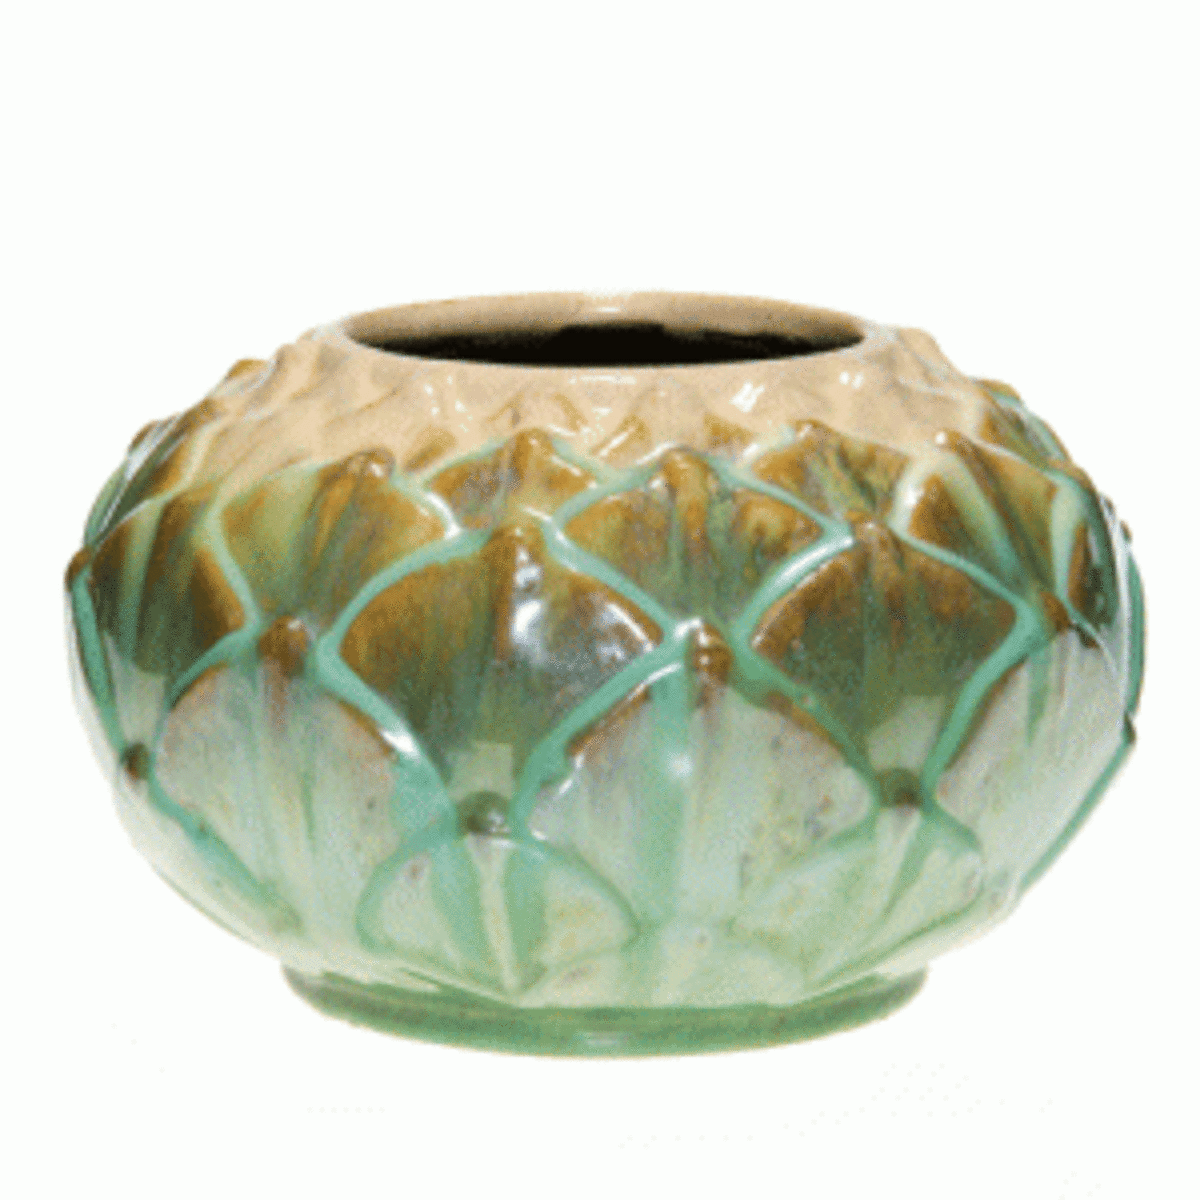 Fulper Artichoke bowl, having an ivory glaze at the rim that gives way to the Flemington green flambe. Impressed with the Fulper middle-period racetrack mark. An uncommon shape with a nice glaze, there are several small burst glaze bubbles. Size is 5 1/2 inches high and 8 1/2 inches across. $700. (Photo courtesy Mark Mussio, Humler & Nolan)